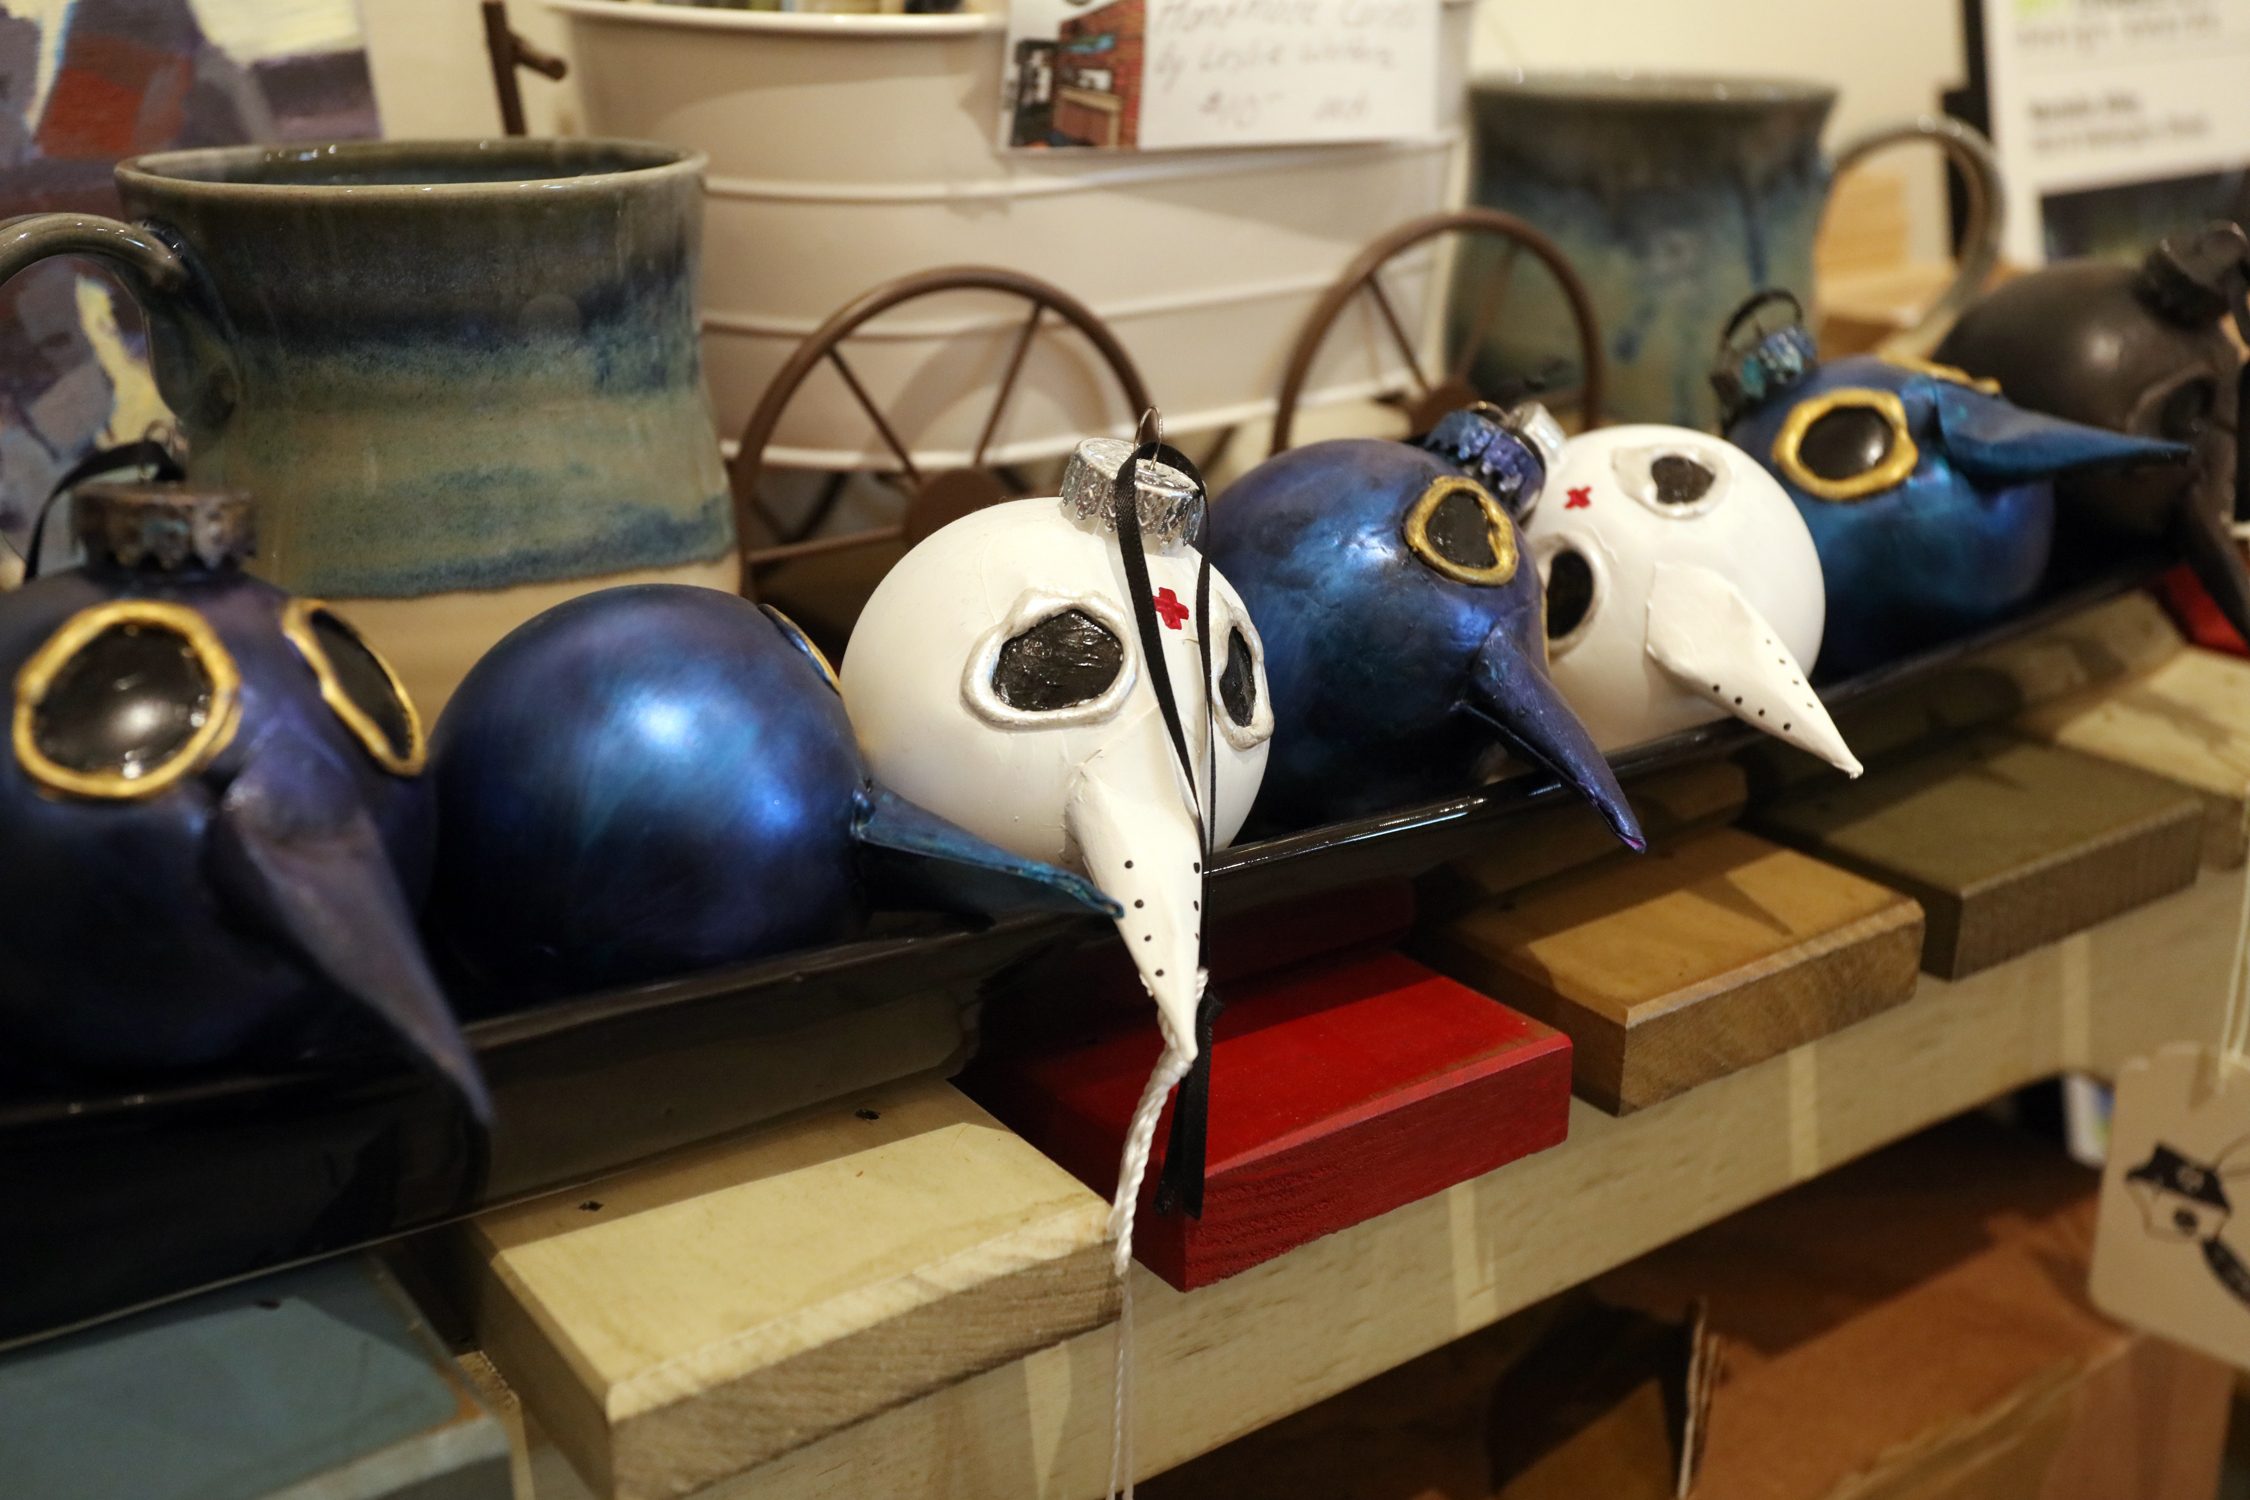 Plague doctor ornaments made by artist Bonnie Humber